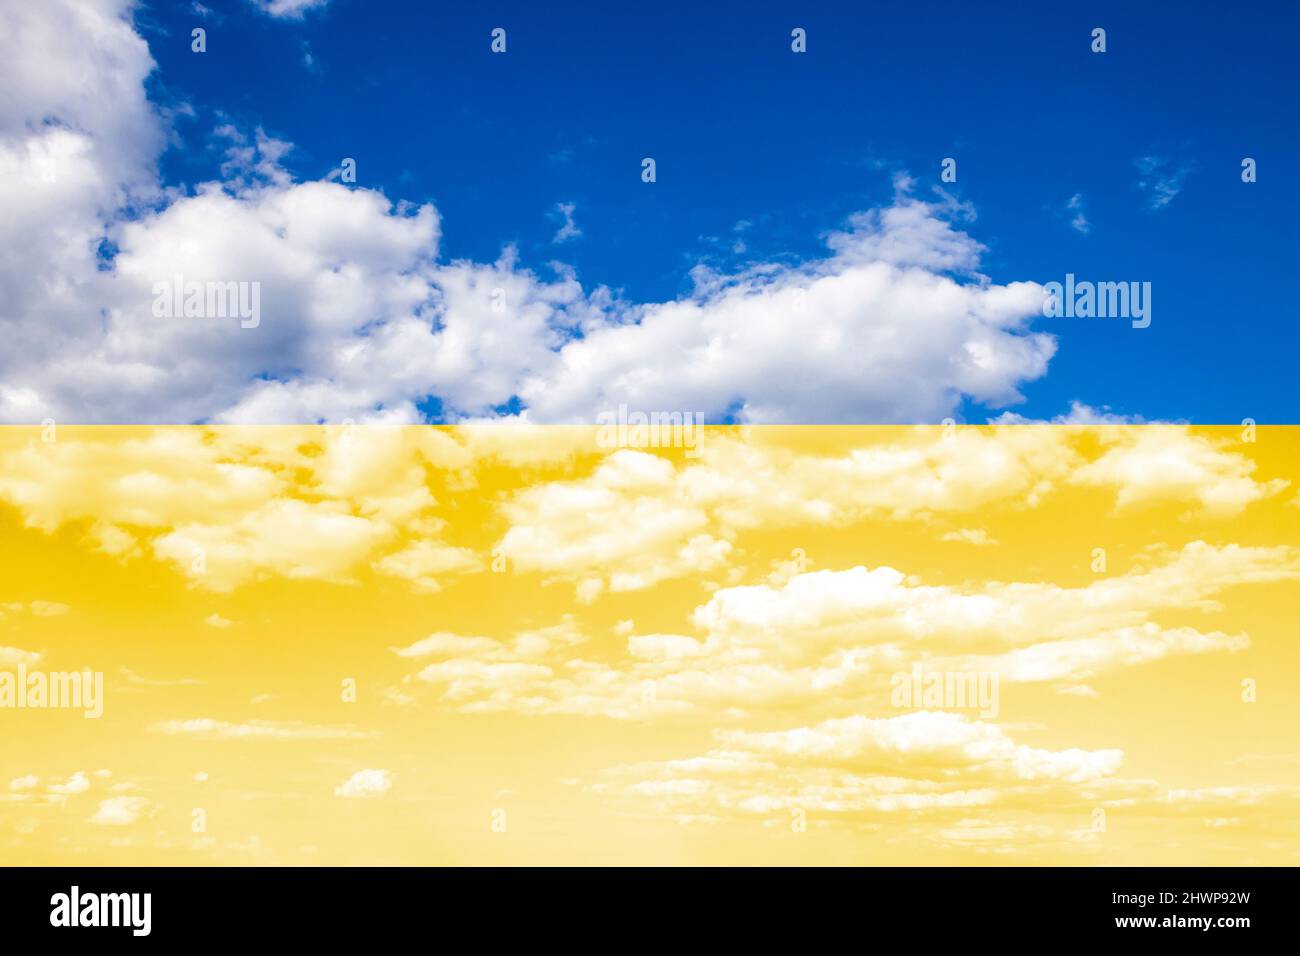 Cloudy sky background in colors of Ukrainian flag Stock Photo